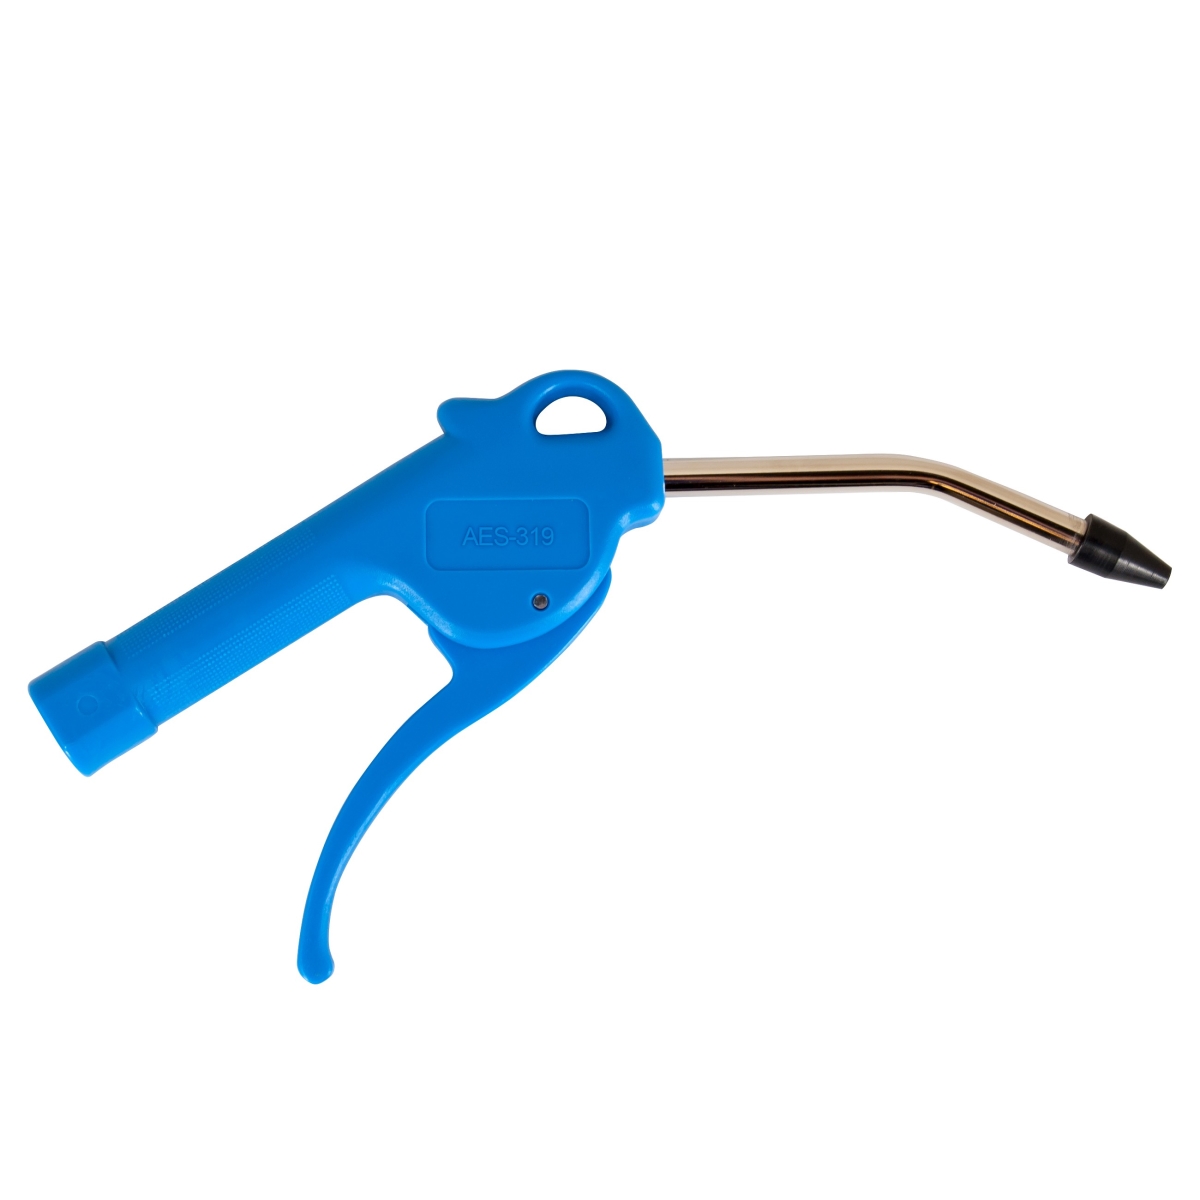 Aes-319 4 In. Blow Gun With Rubber Tip